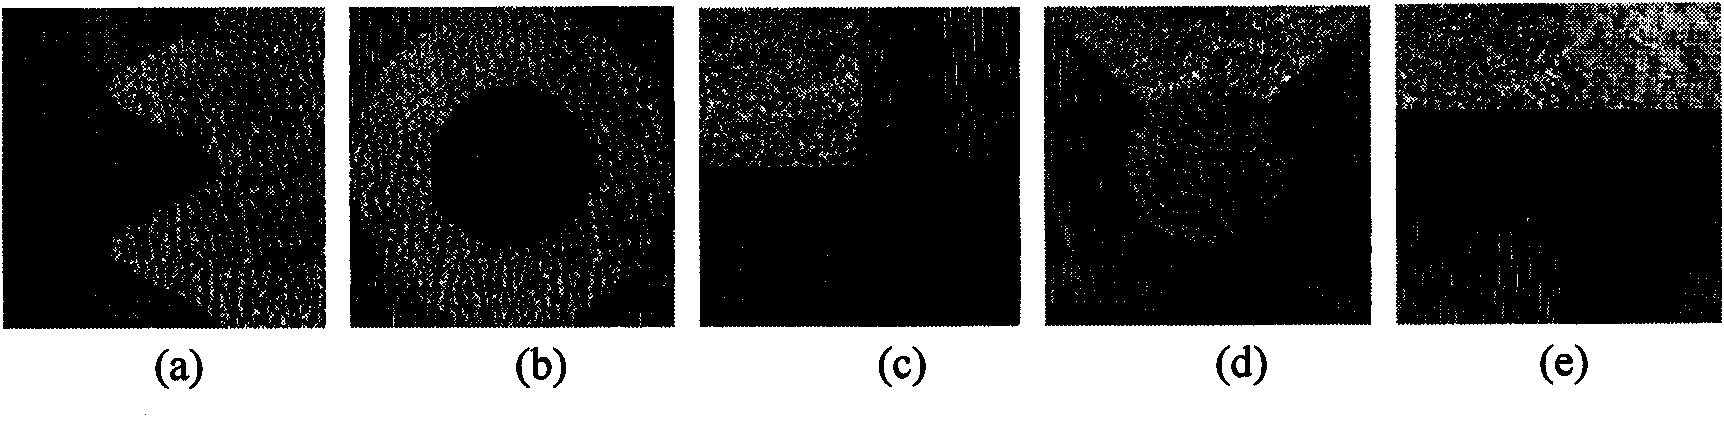 Texture image segmenting method based on reinforced airspace-transform domain statistical model